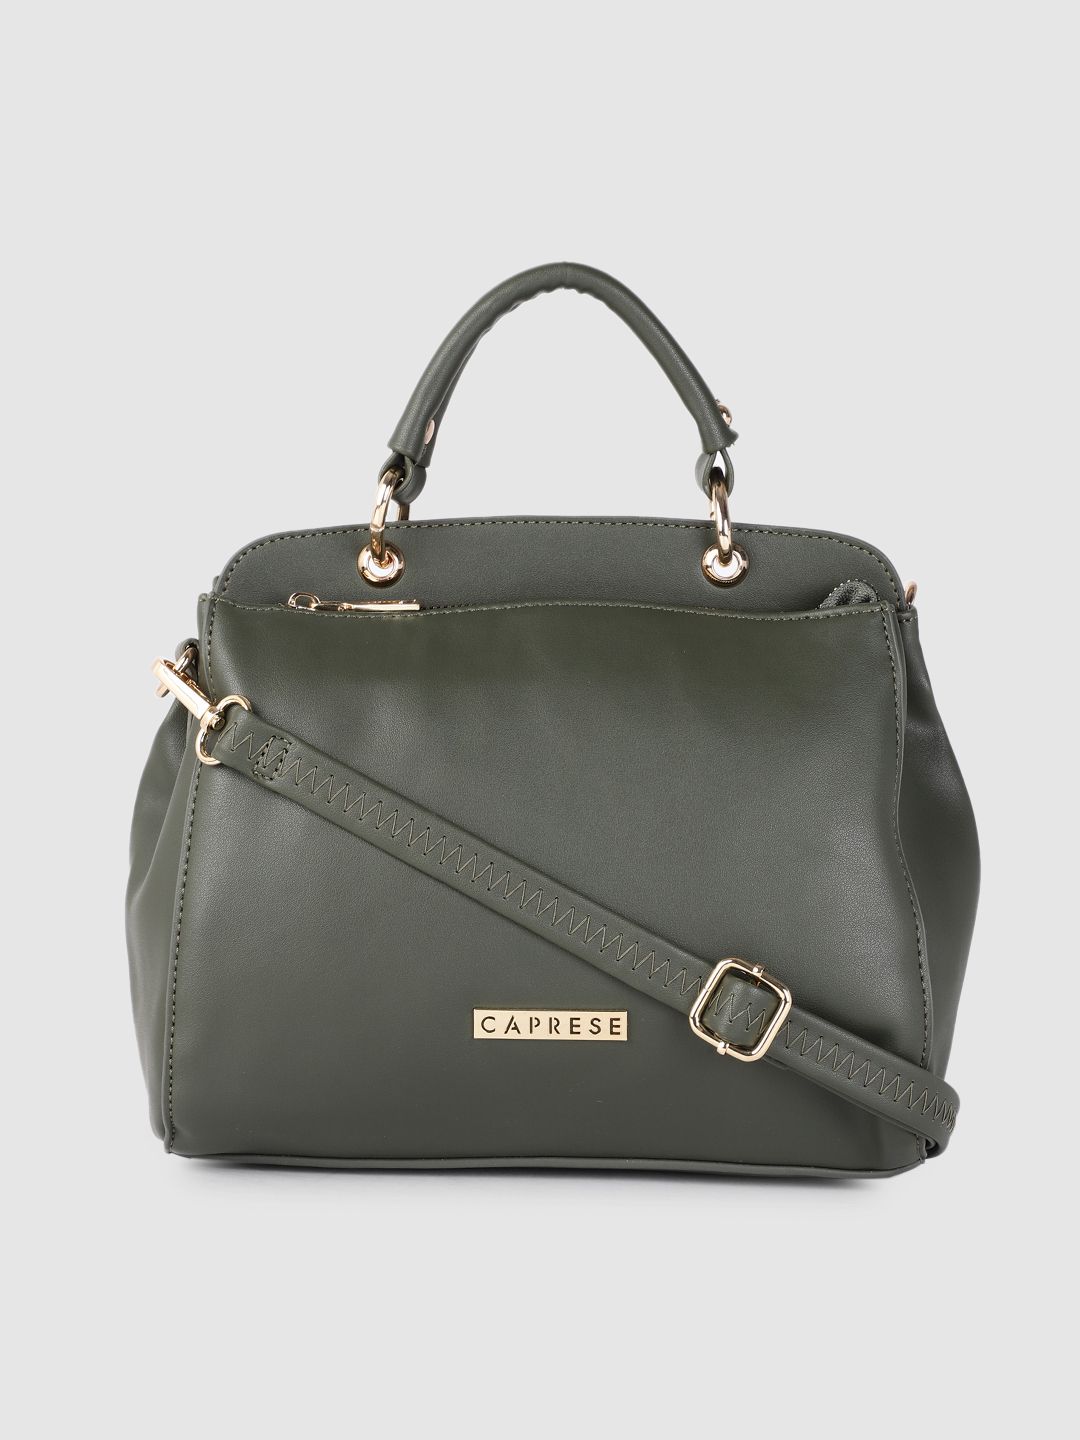 Caprese Olive Green Structured Handheld Bag Price in India